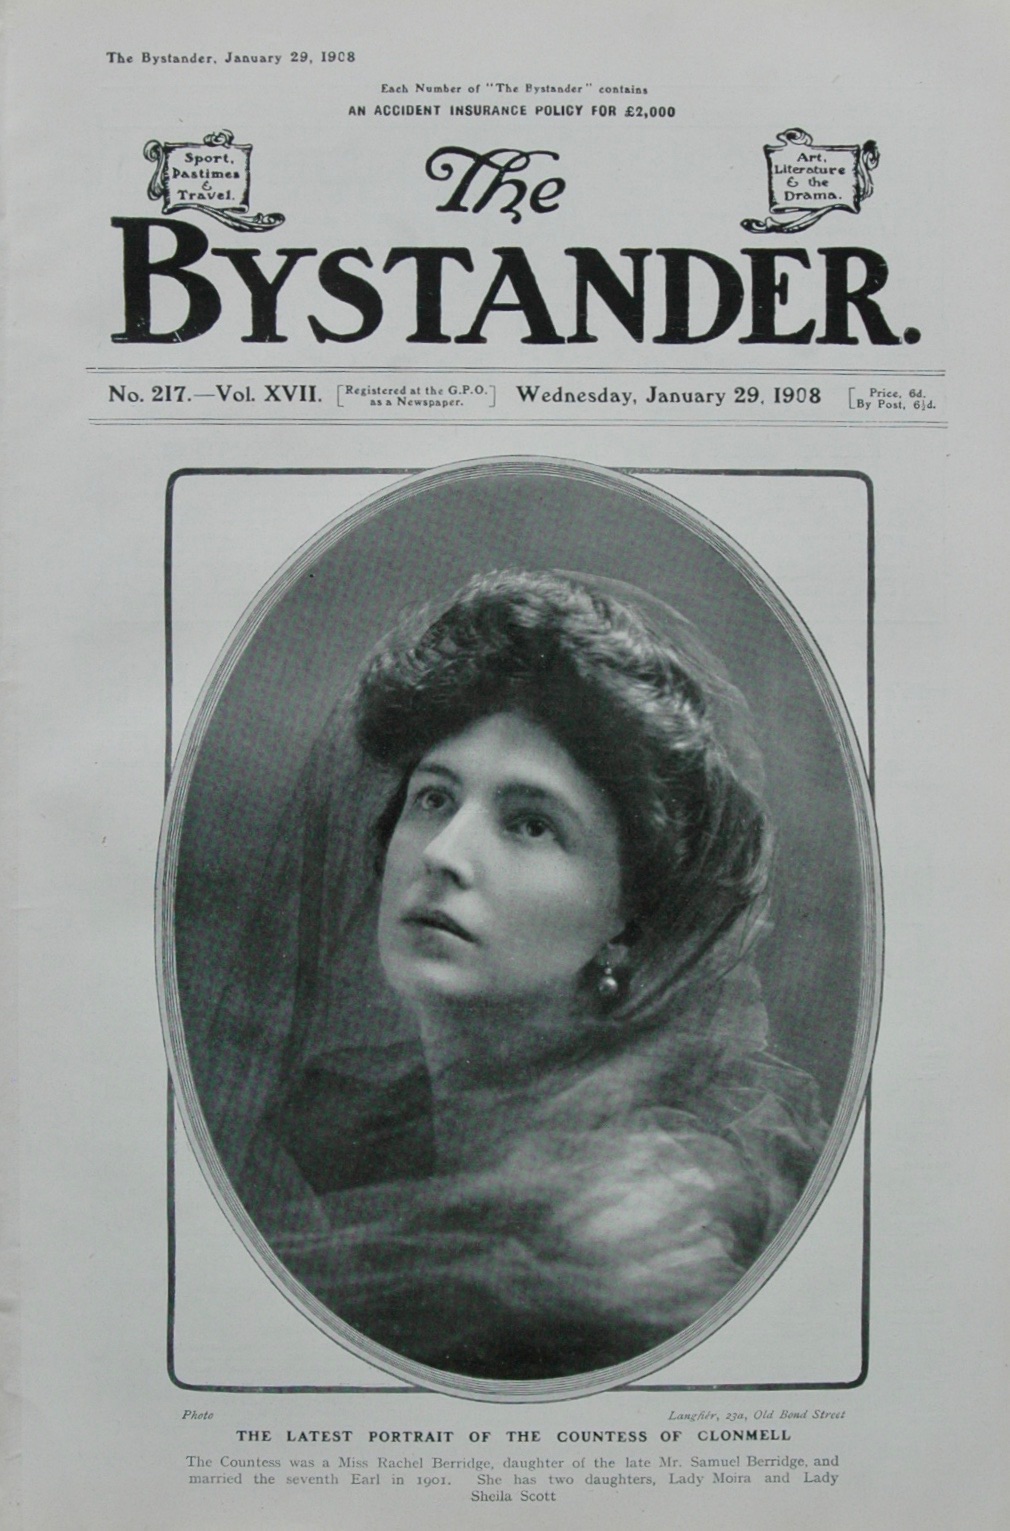 The Bystander, Title Page - Countess of Clonmell